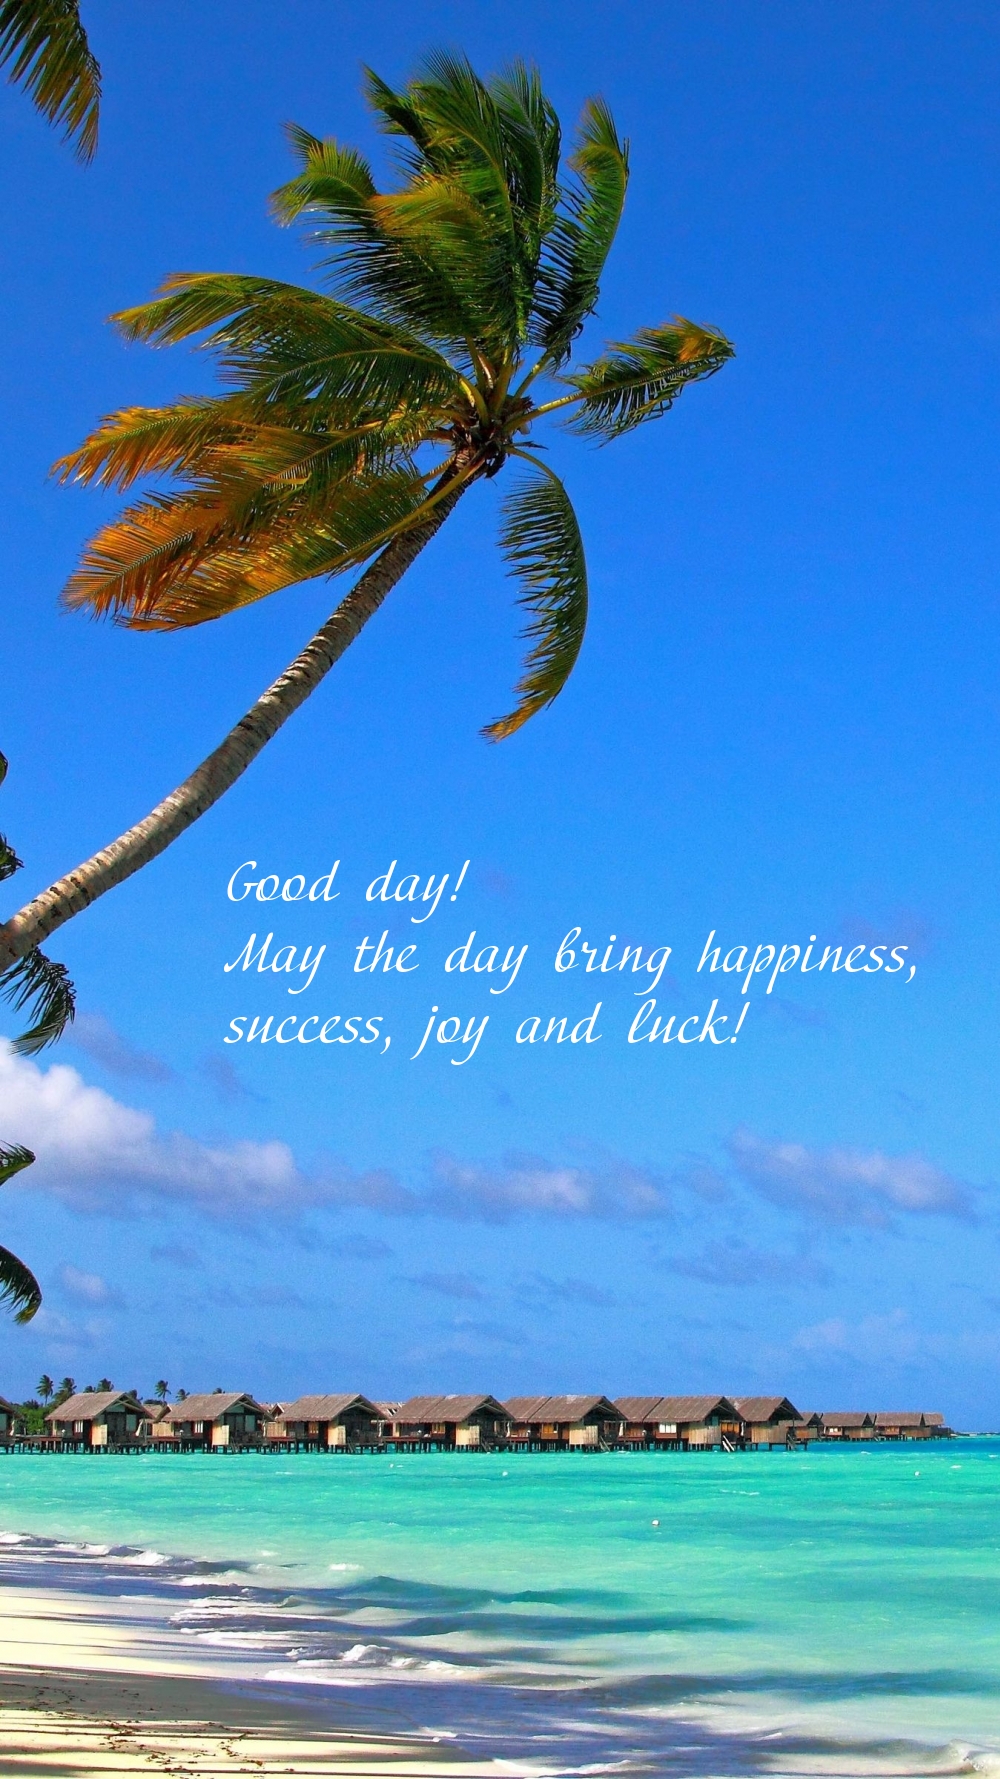 Good day! May the day bring happiness, success, joy and luck!